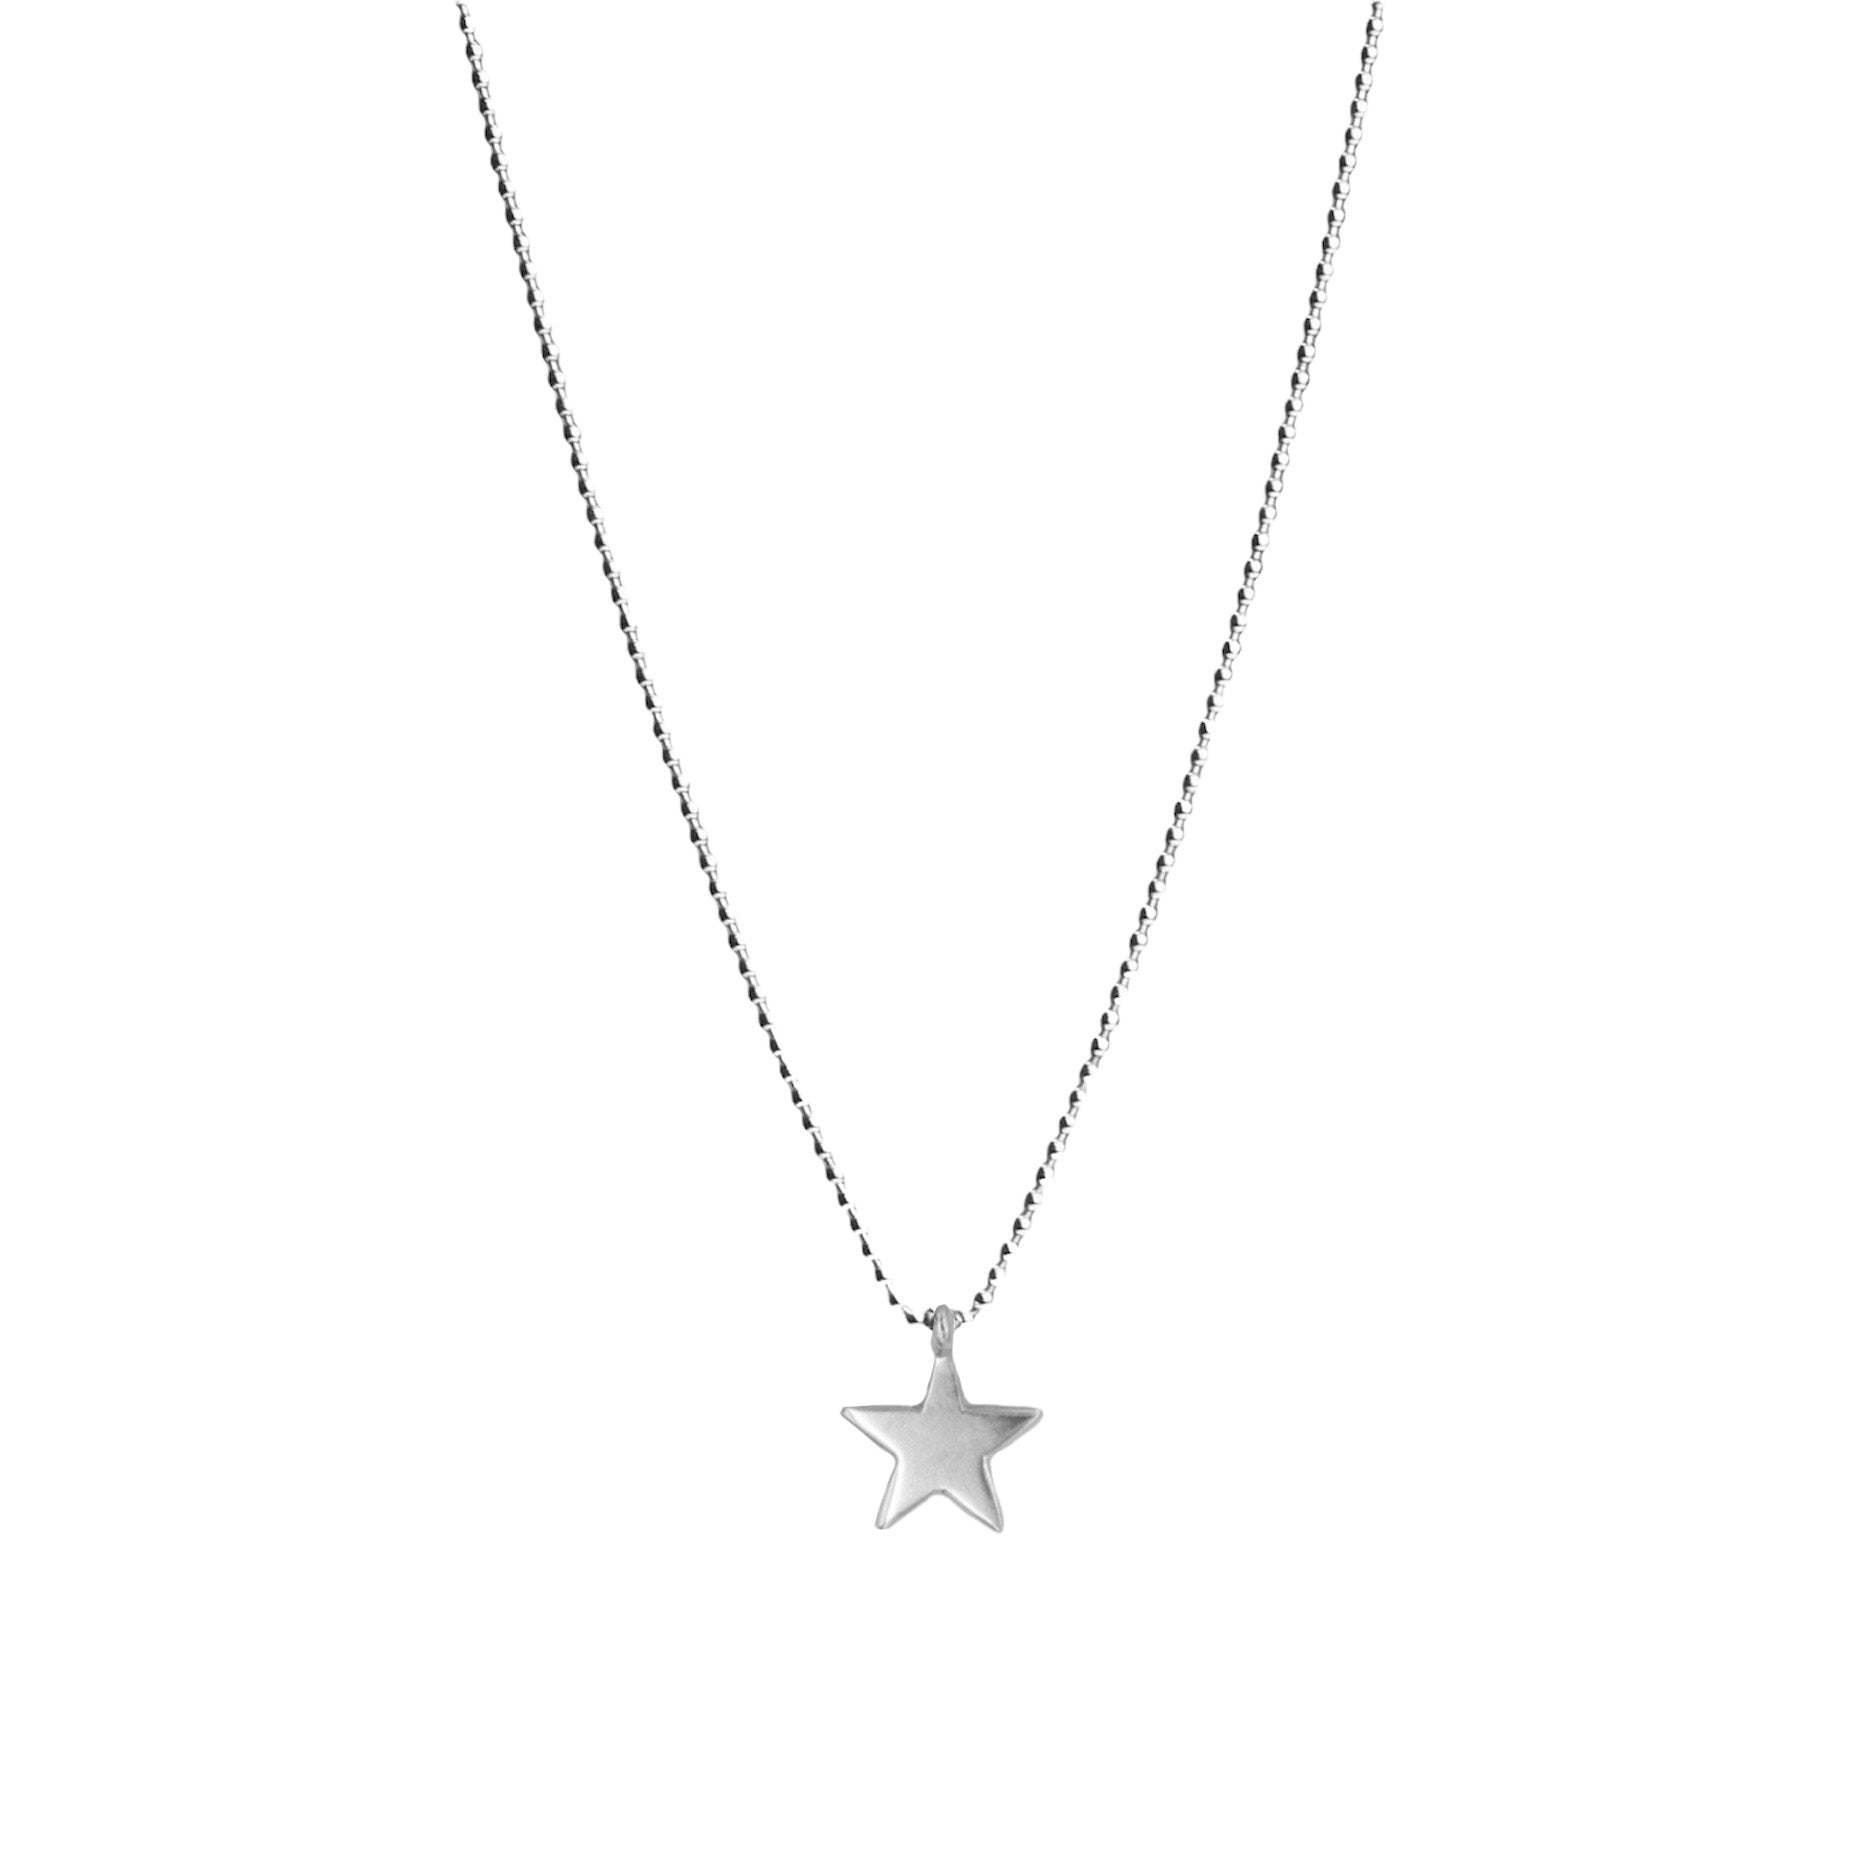 Belle & Bee Sterling Silver Ball Chain necklace with Midi Star Charm